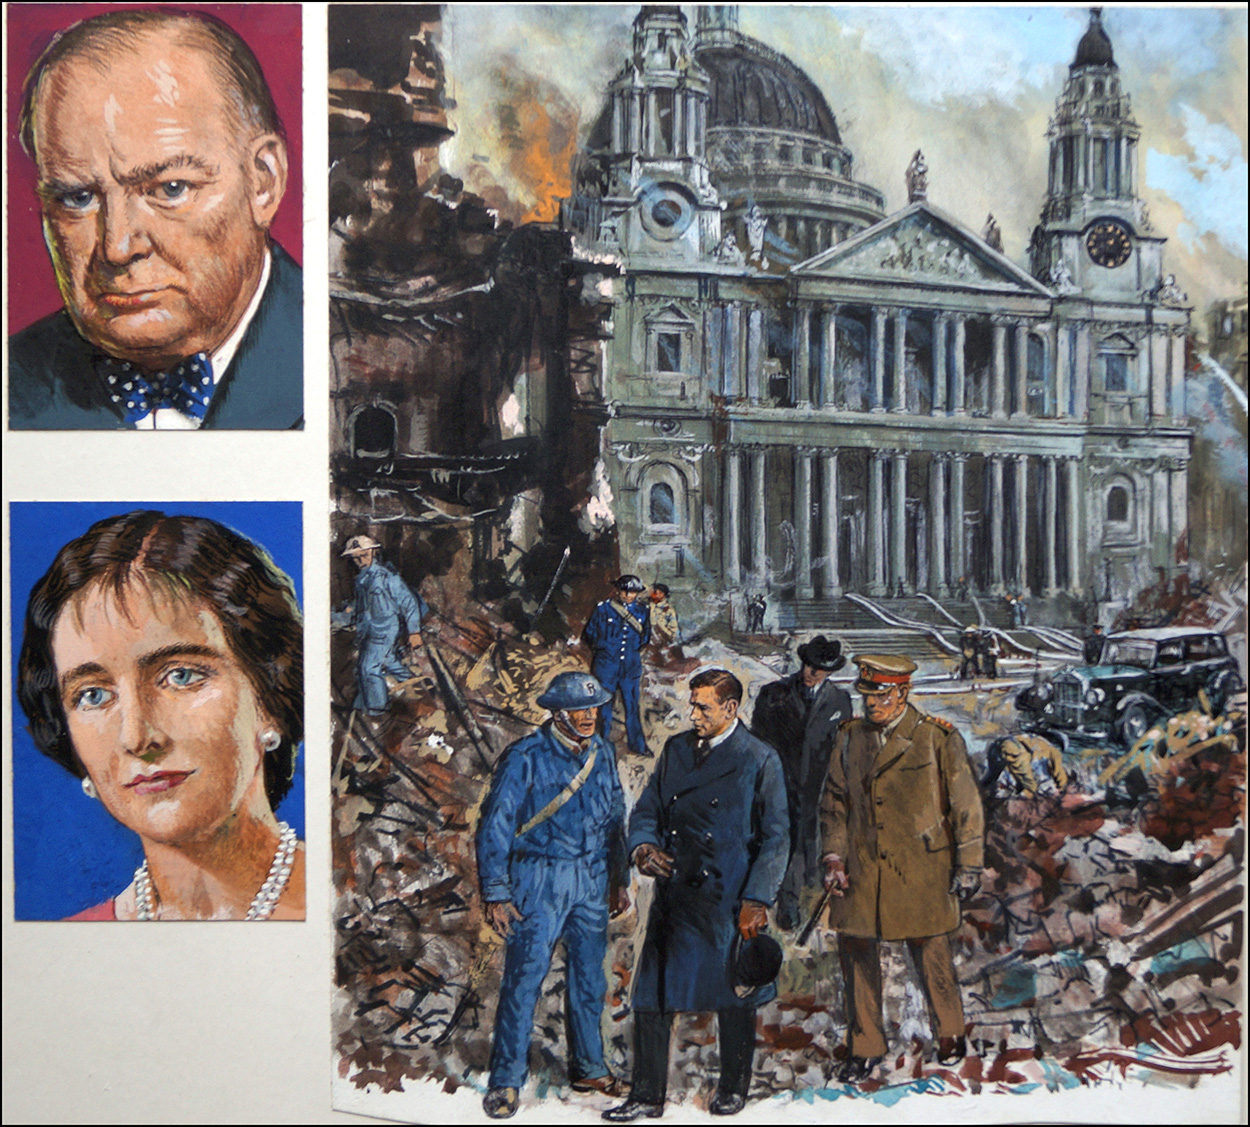 The Blitz (Original) art by Clive Uptton at The Illustration Art Gallery